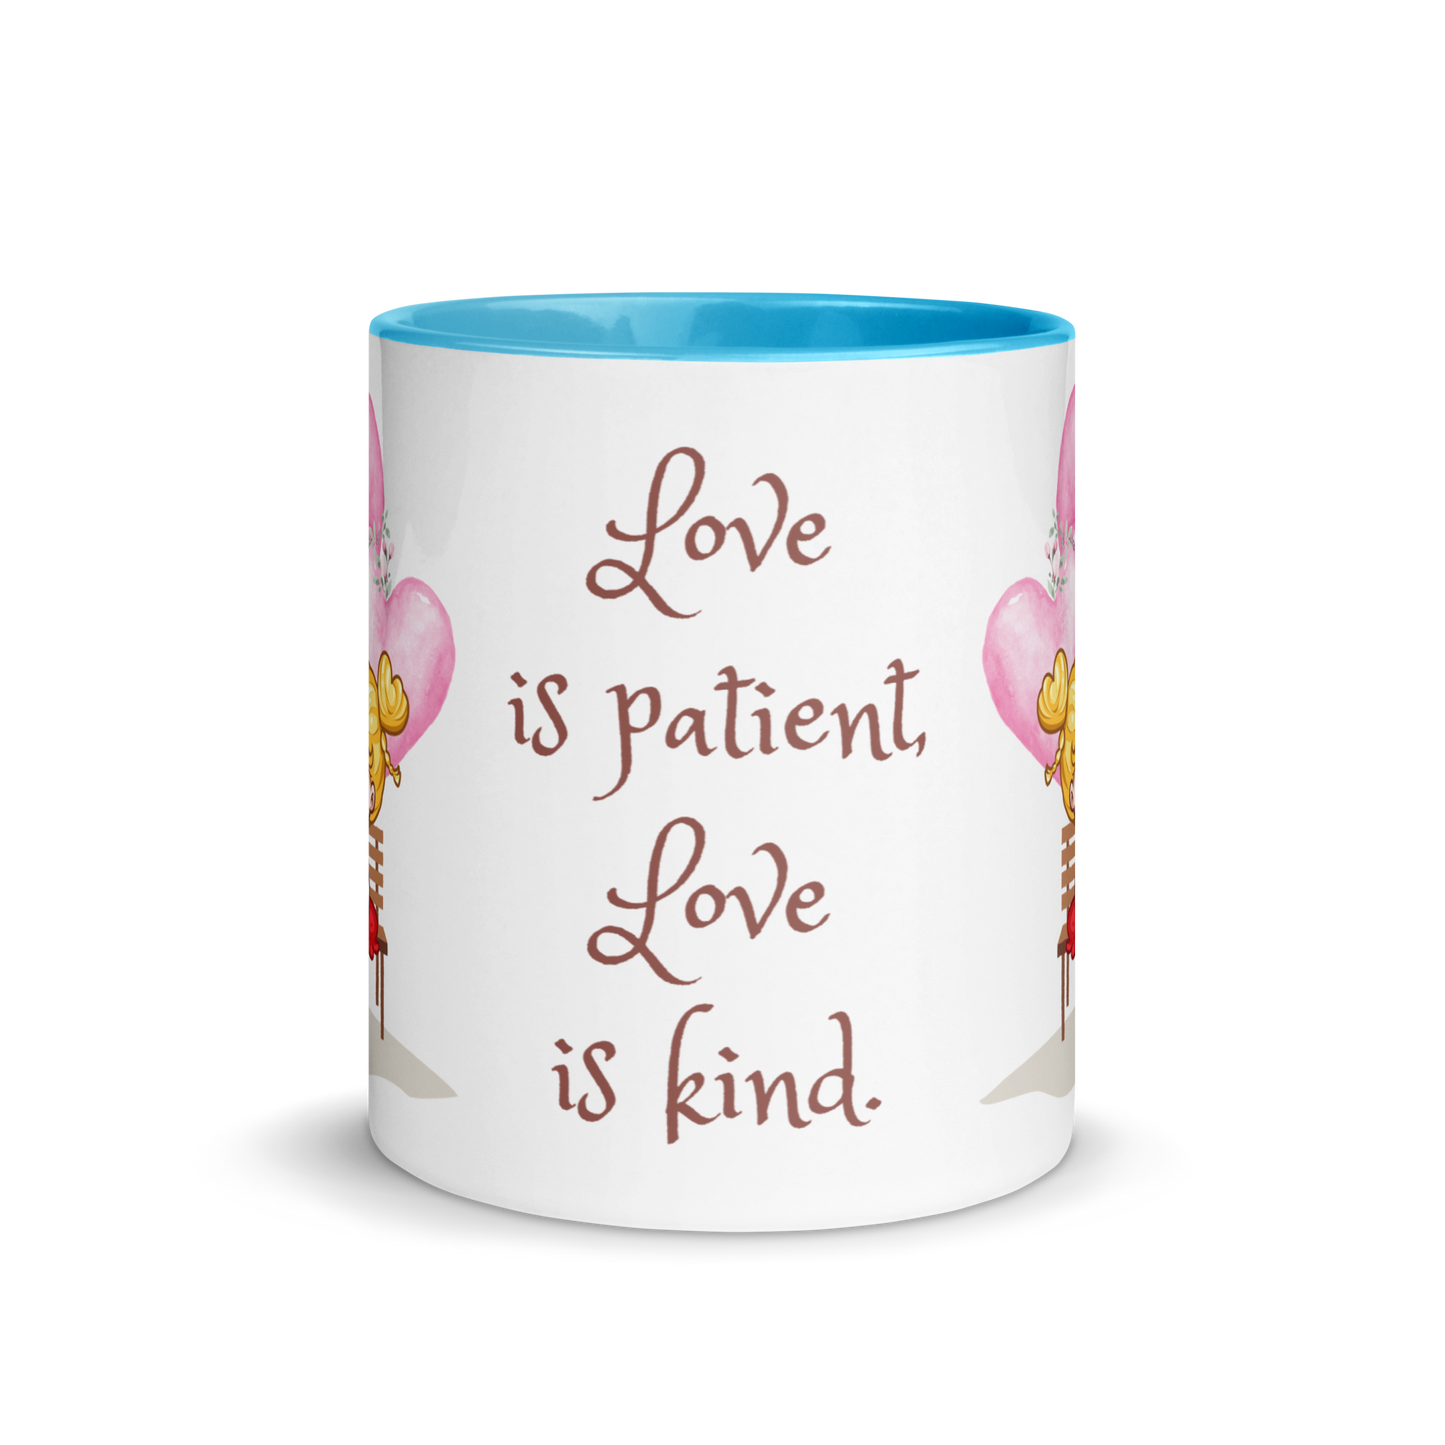 Accent Coffee Mug 11oz | Love is Patient Love is Kind | Love Themed